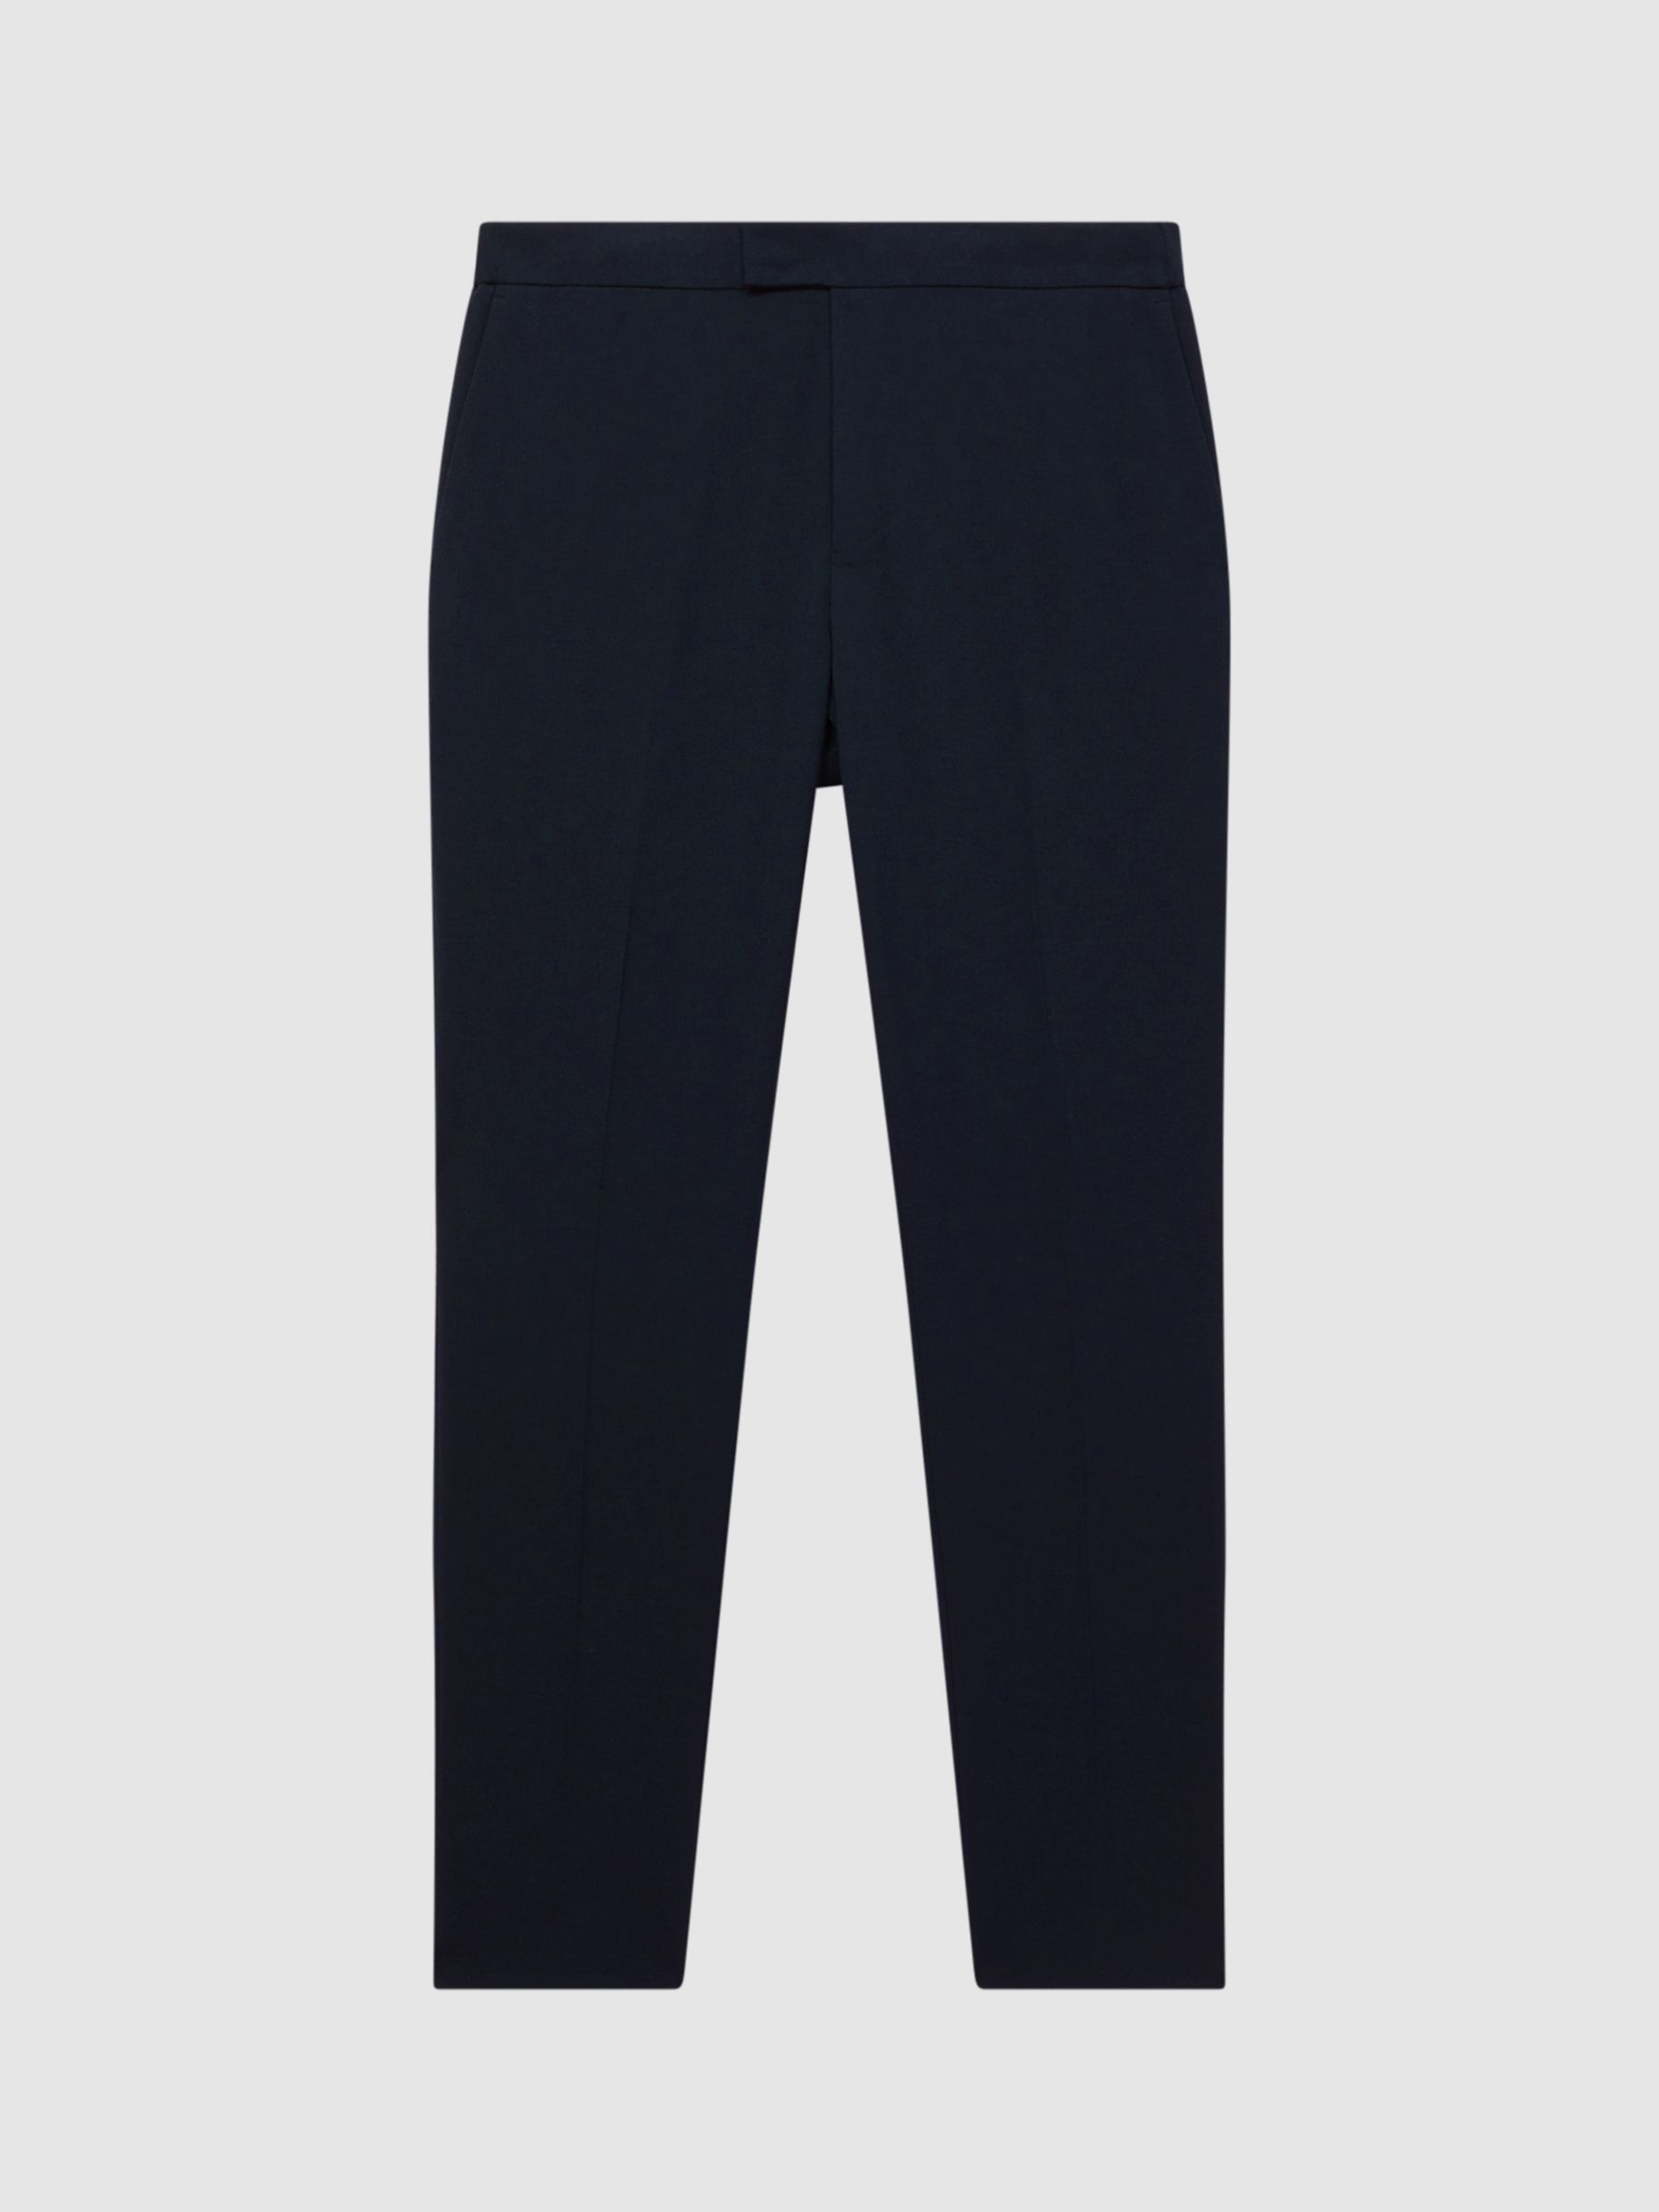 Reiss Found Slim Trousers, Navy at John Lewis & Partners